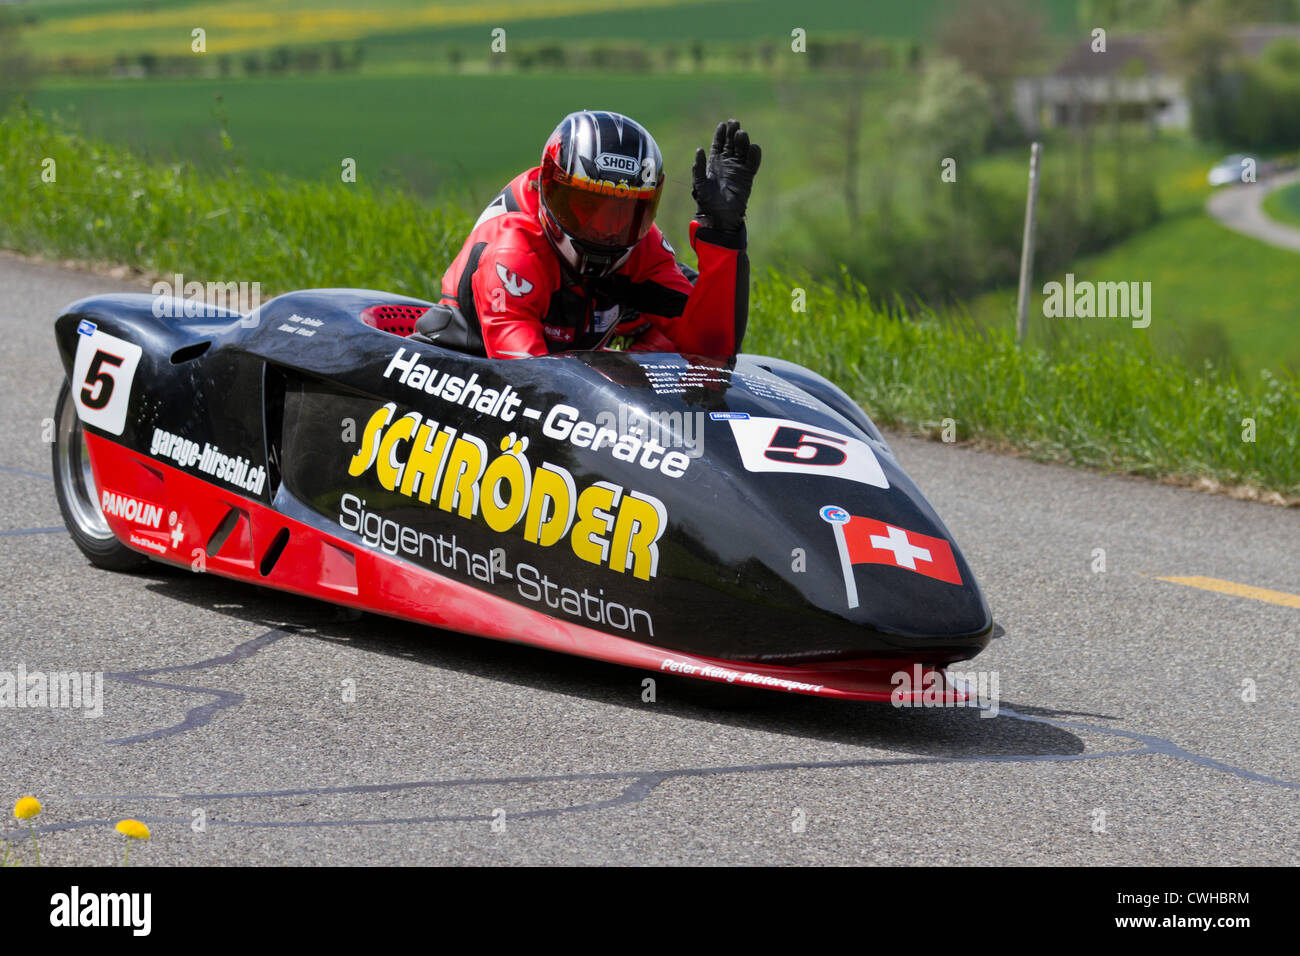 Vintage race car LCR Suzuki Sidecar from 2000 at Grand Prix in Mutschellen, SUI on April 29, 2012. Stock Photo